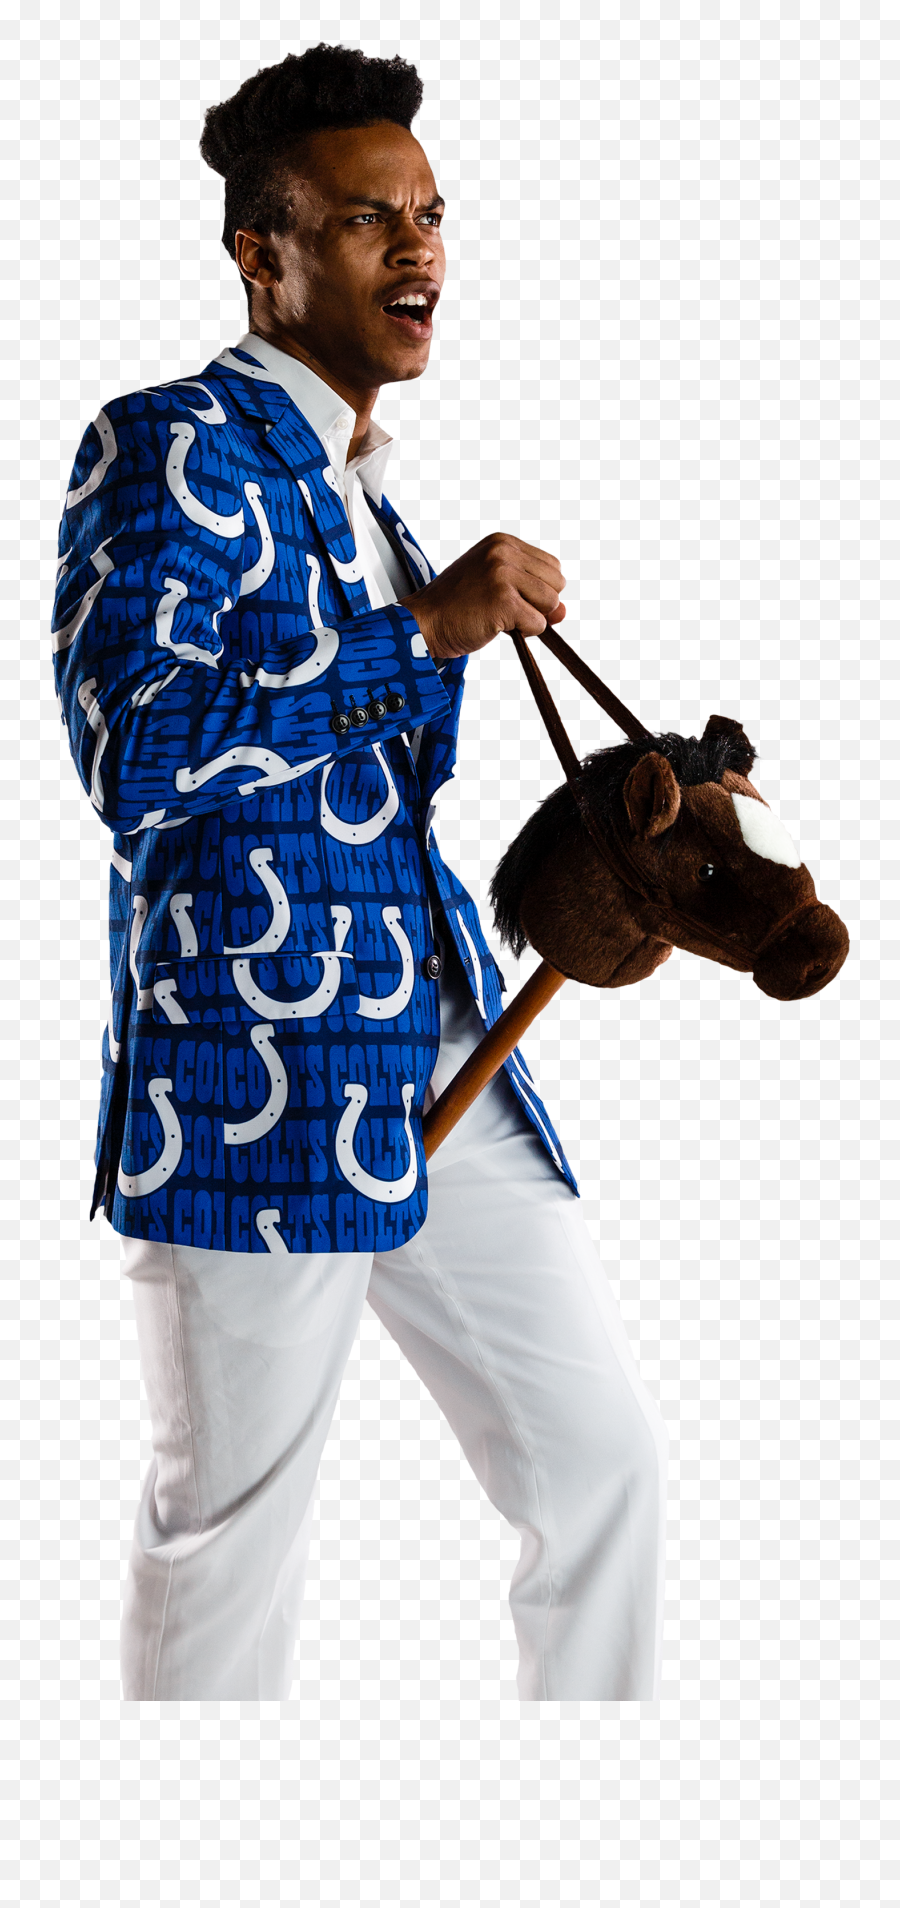 The Indianapolis Colts Nfl Gameday Blazer - Smart Casual Emoji,Indianapolis Colts Logo